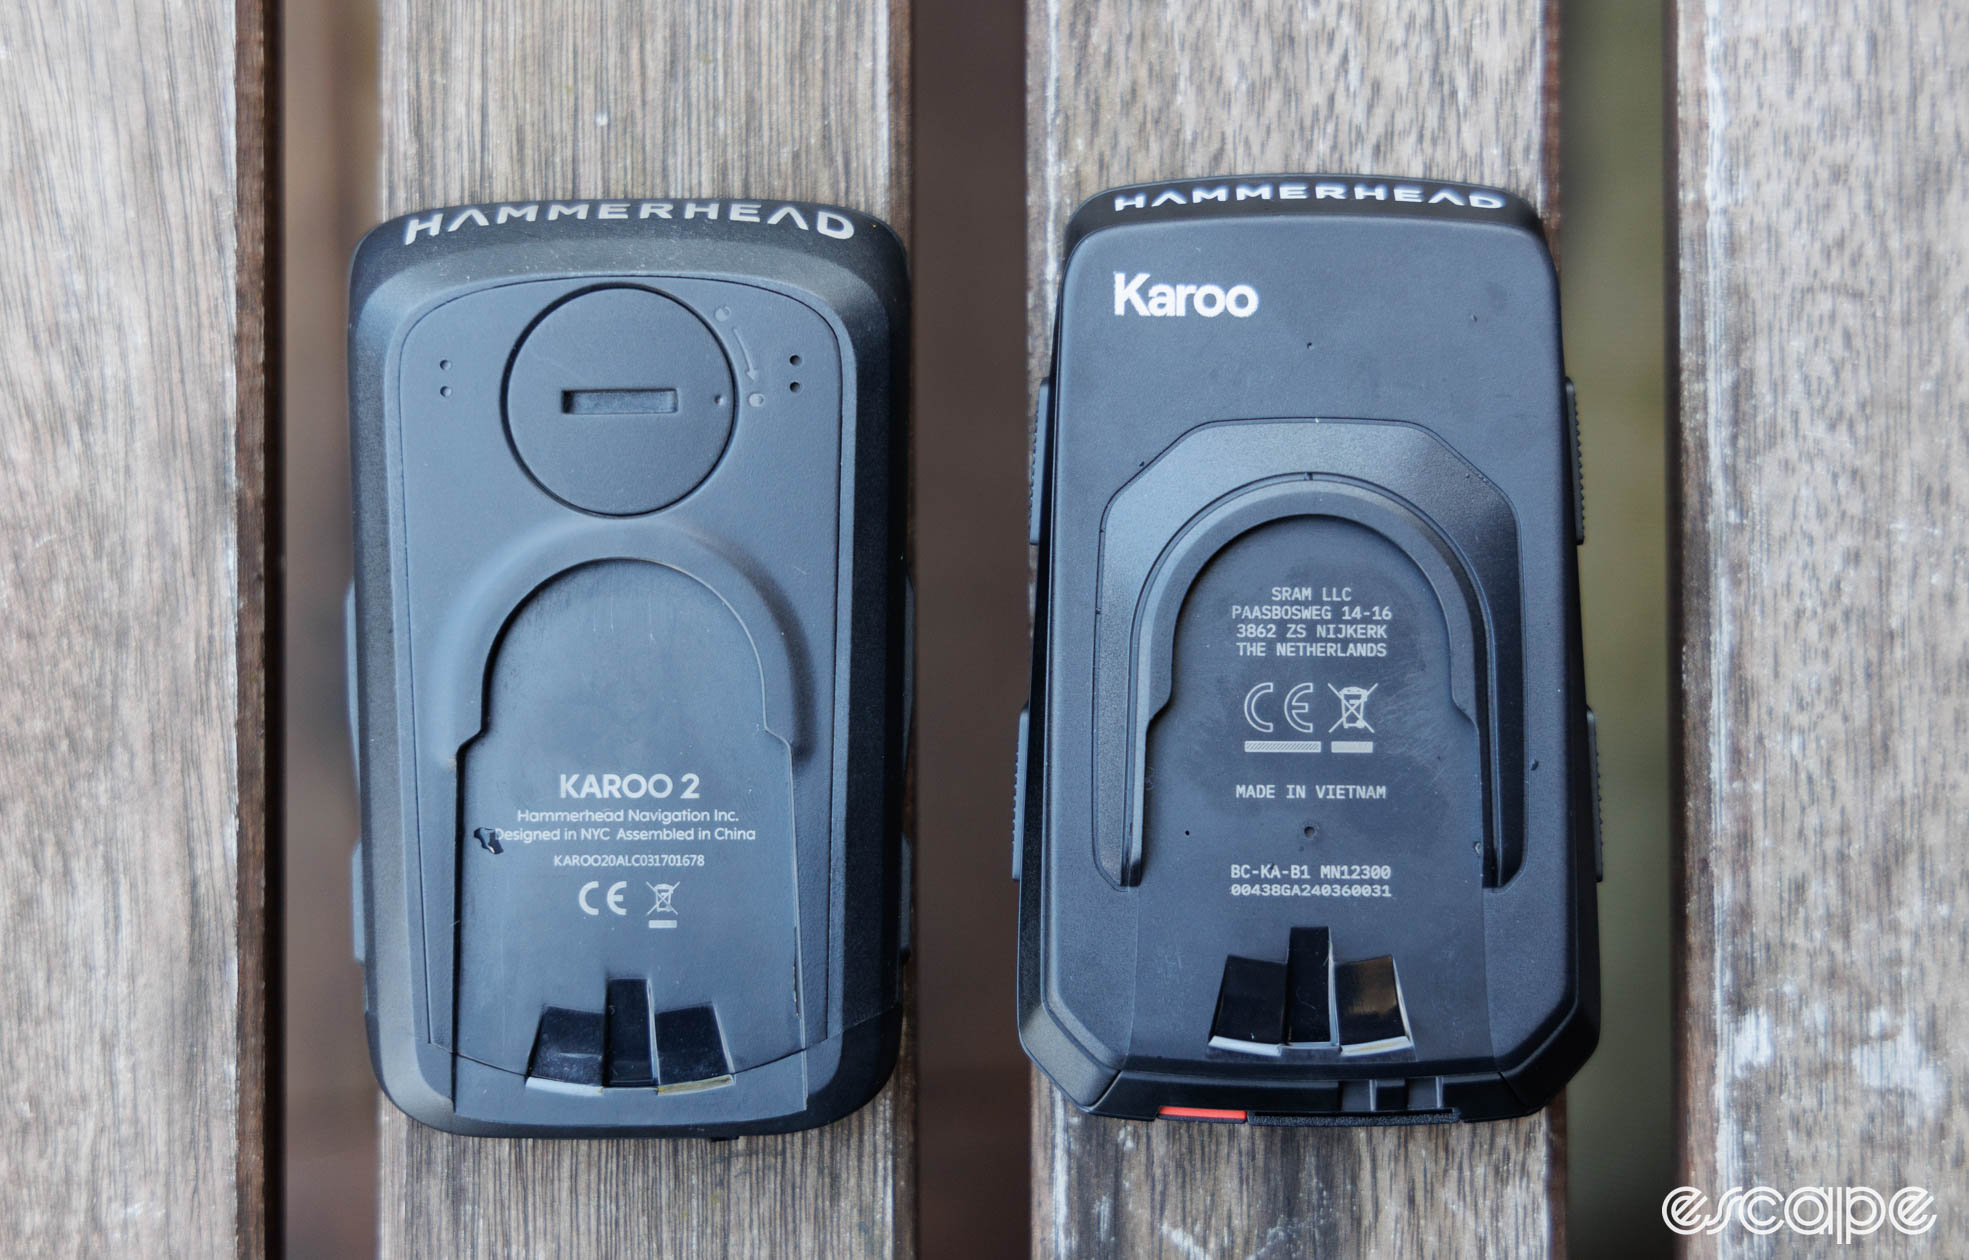 The Hammerhead Karoo 2 (left) and Hammerhead Karoo (right) next to each other. Both units are tipped upside down to show the backs. 